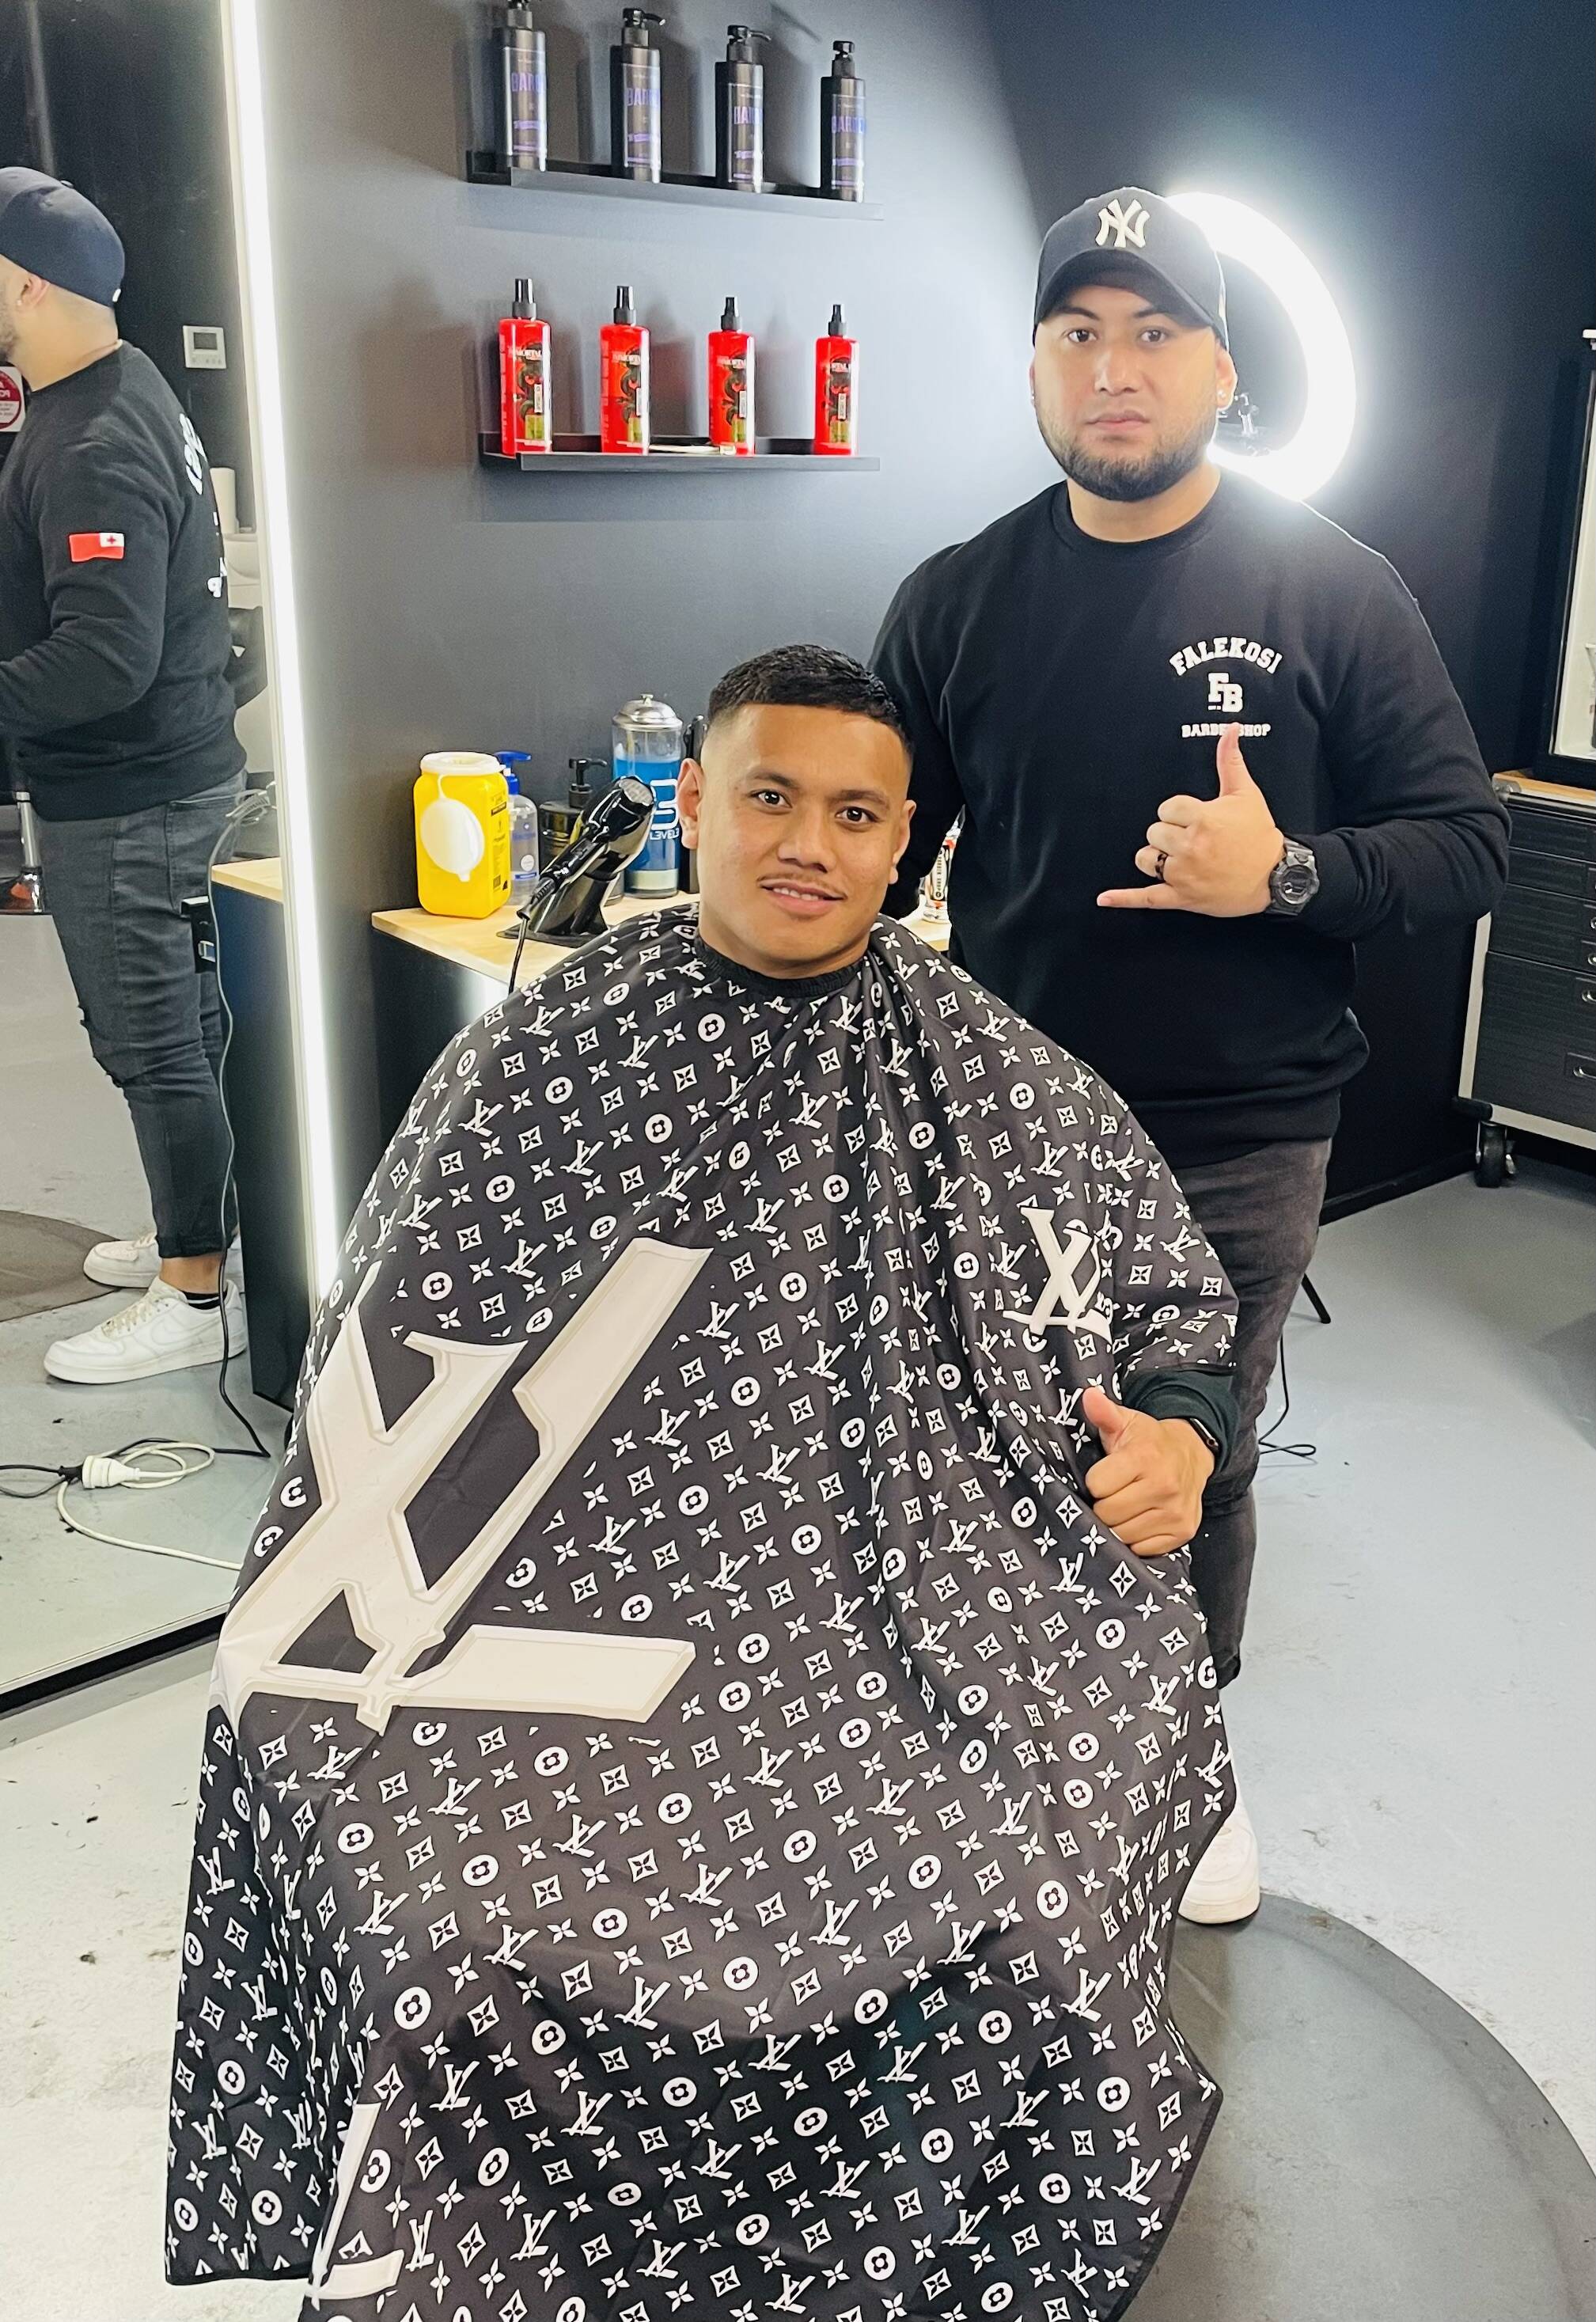 The Barbershop - It's called LOUIS VUITTON BARBER 